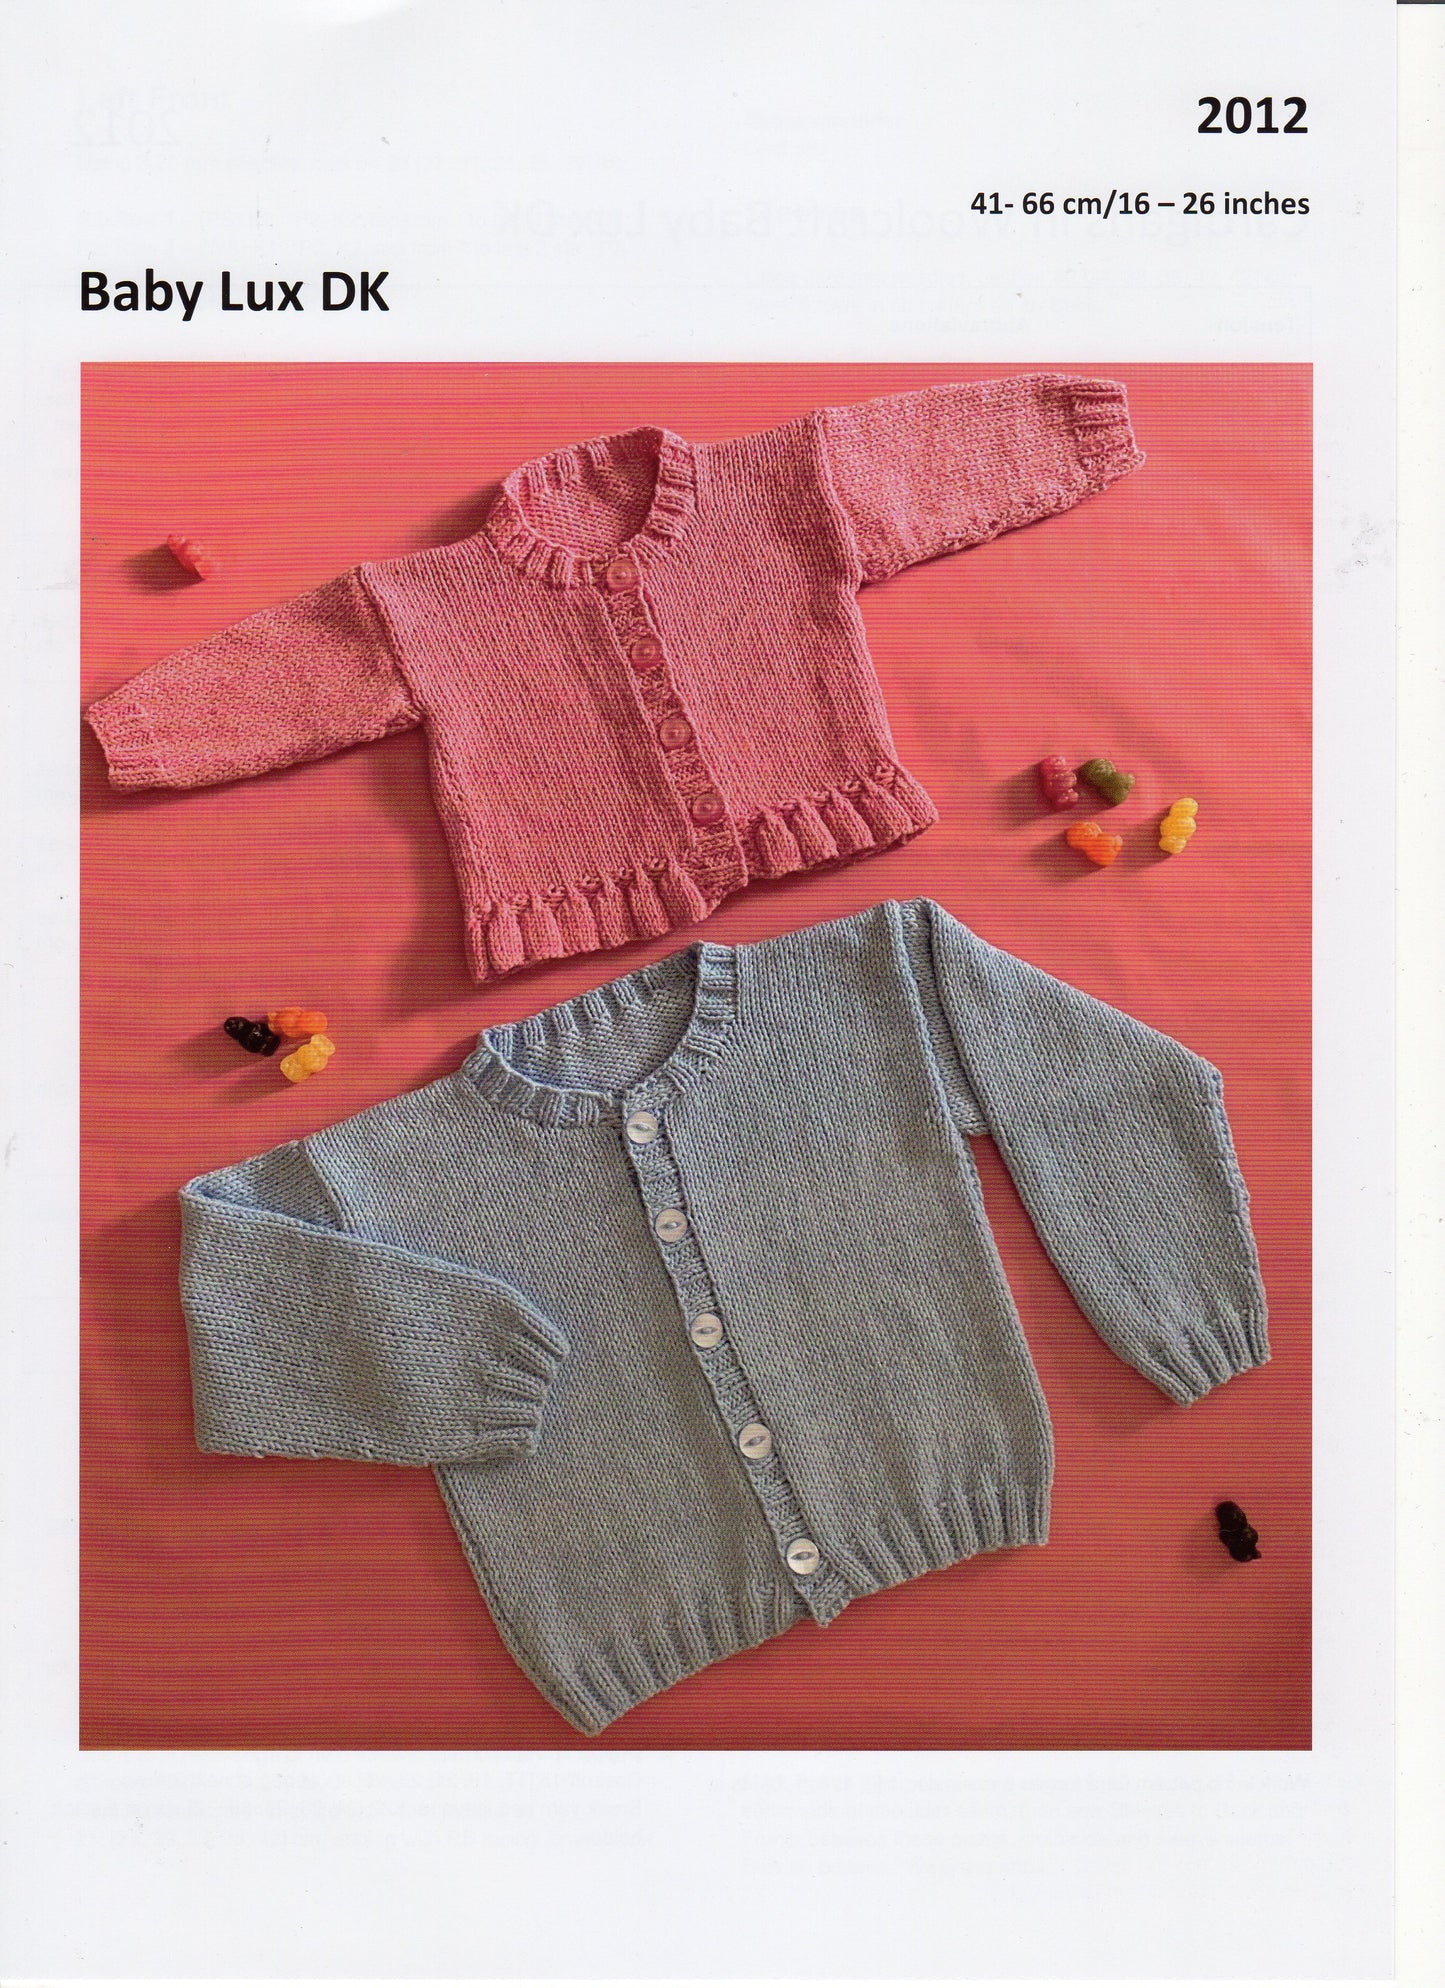 Knitting Pattern 2012 - Baby Cardigans in Baby Lux DK